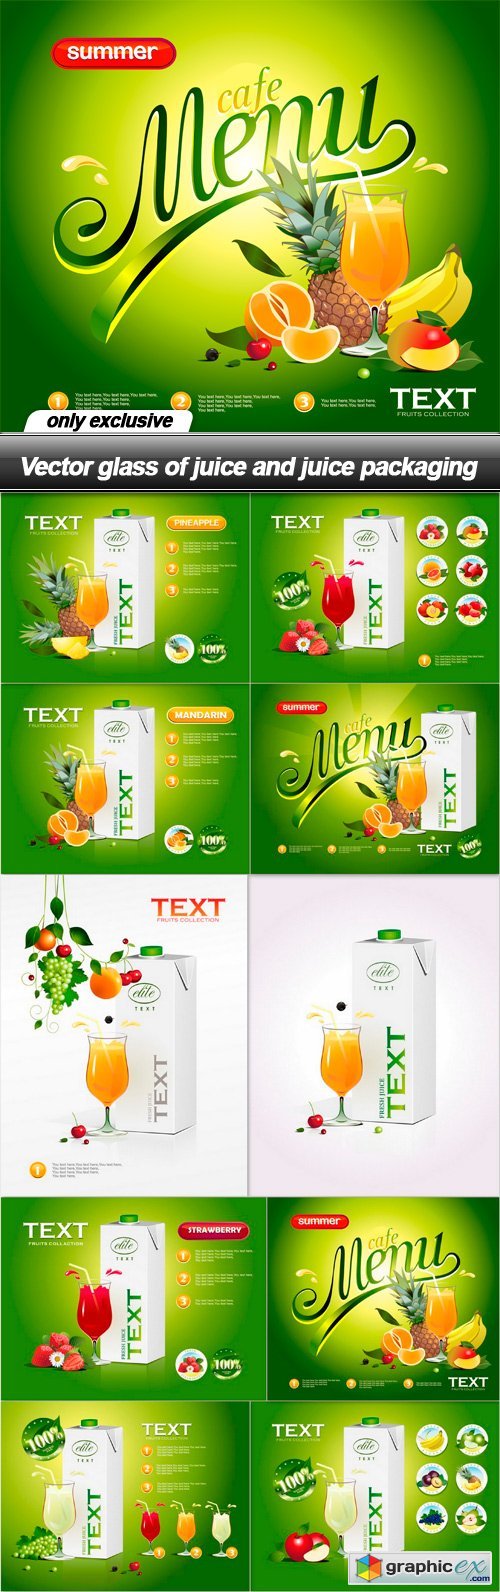 glass of juice and juice packaging - 10 EPS